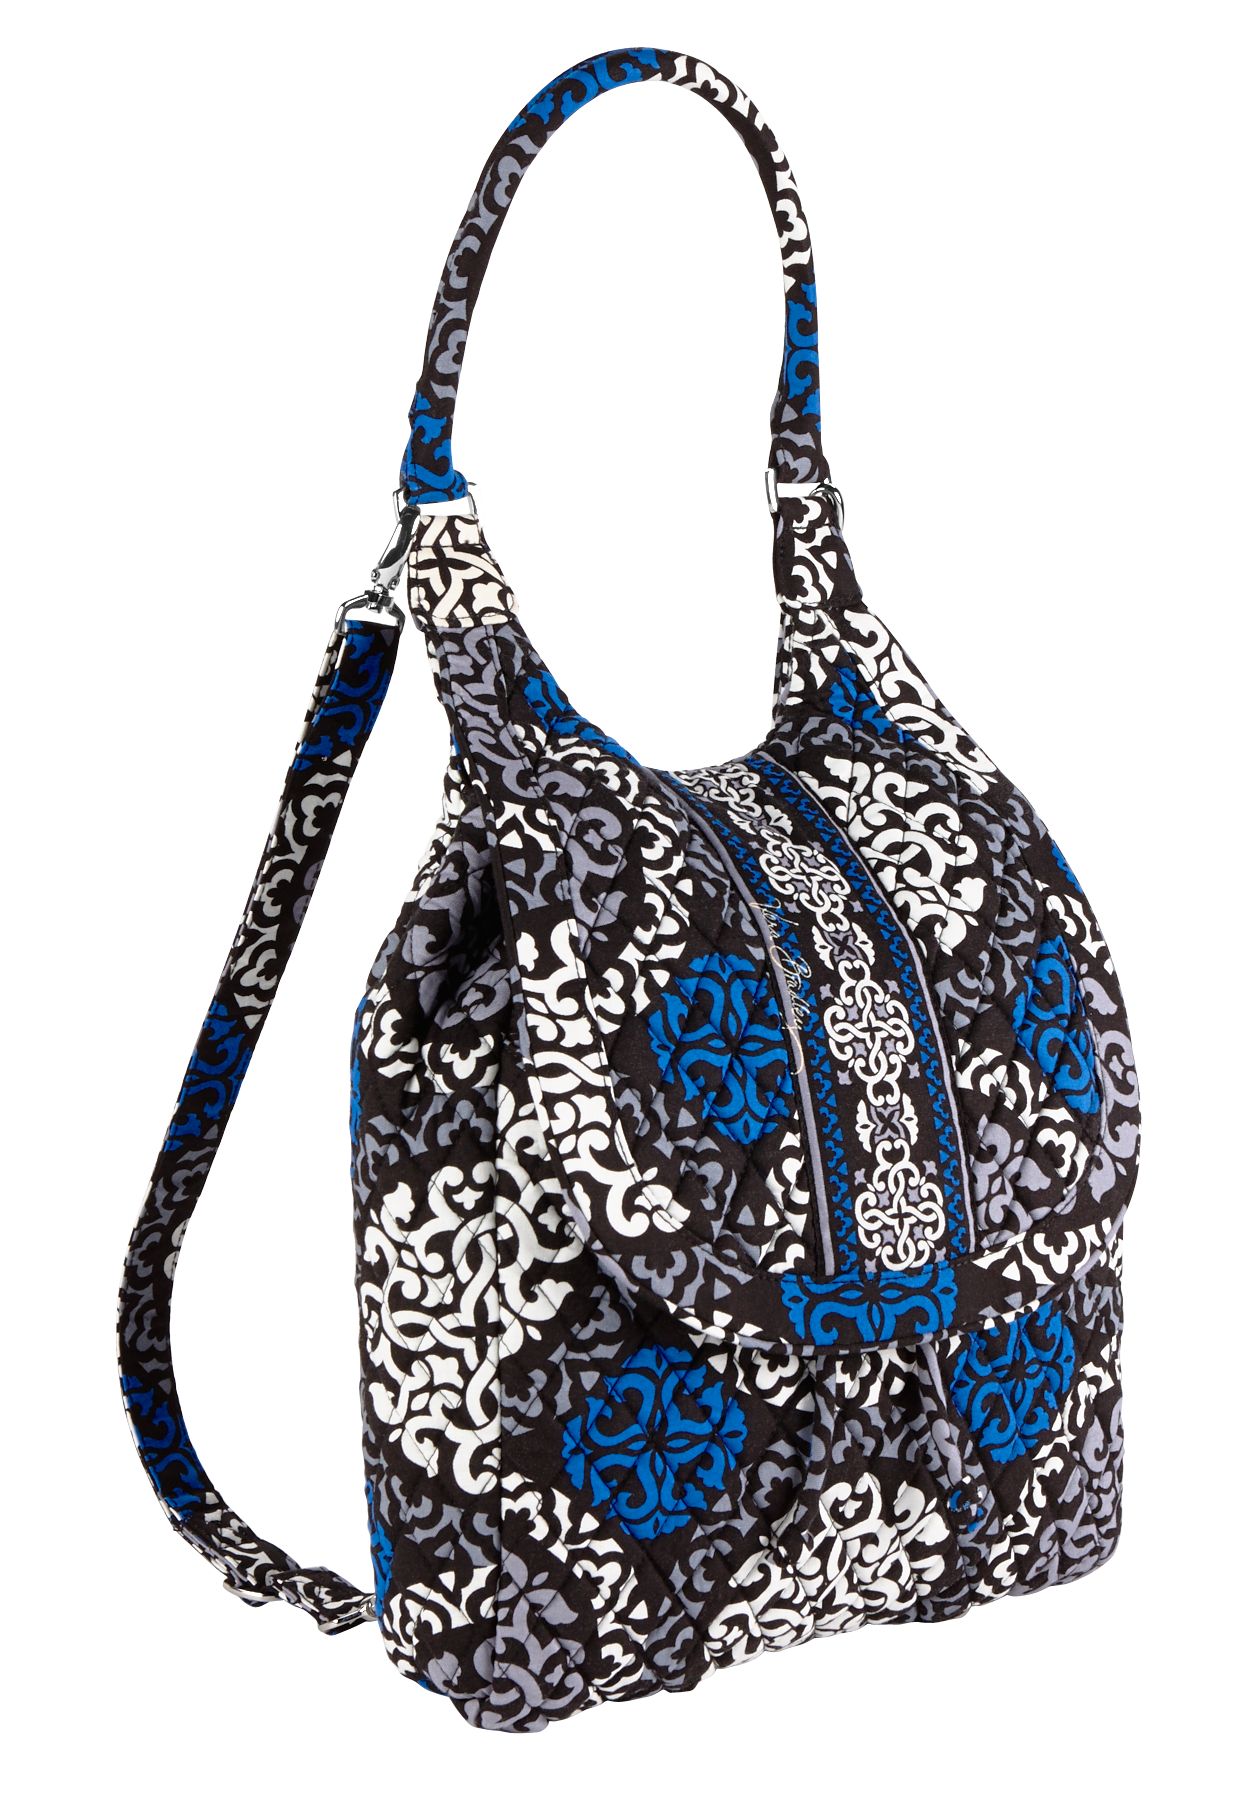 Vera Bradley Backpack Tote in Canterberry Cobalt